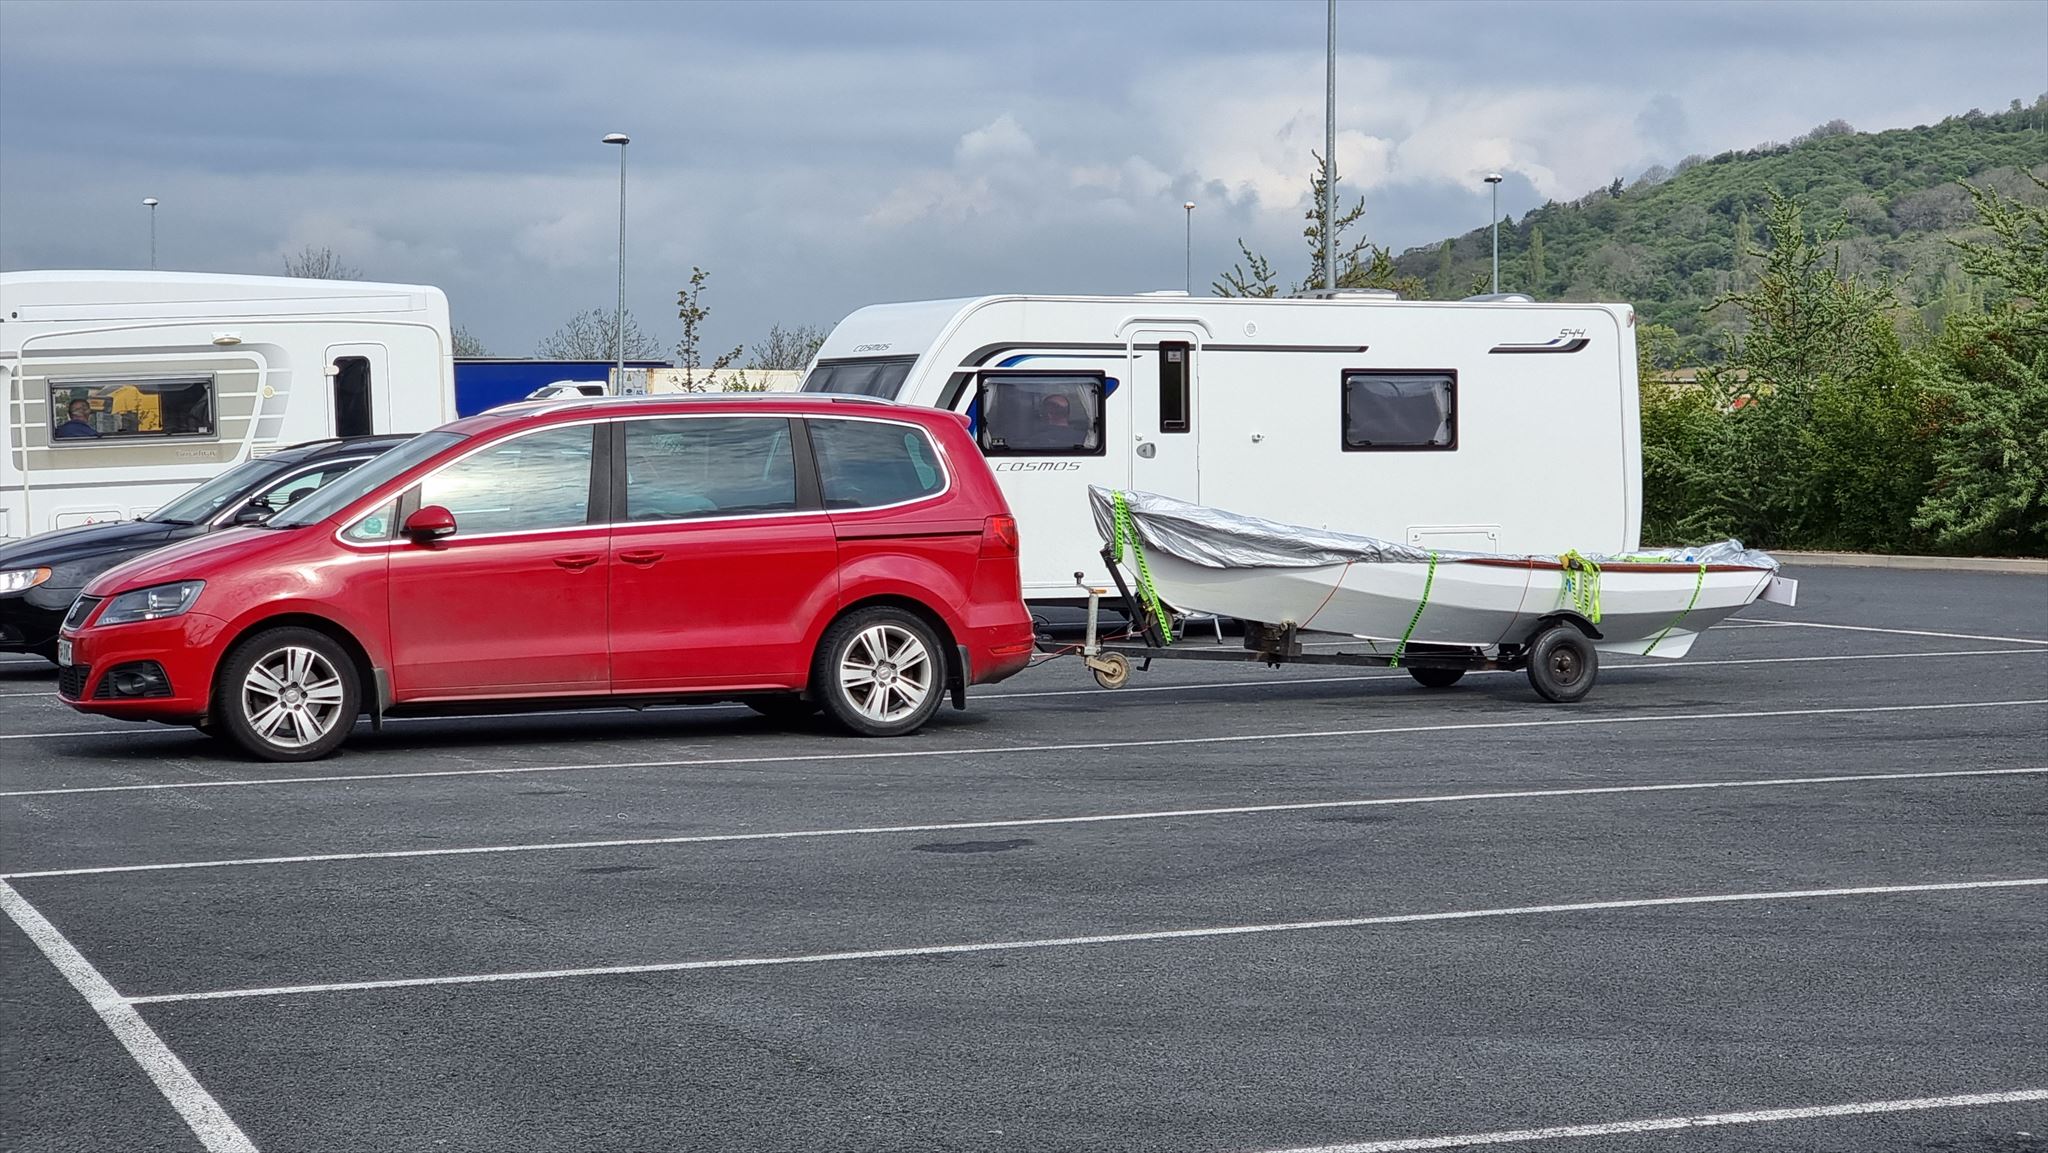 Arthur (red car) and Lucy (rowboat in tow) parked at a service station alongside caravans and HGVs